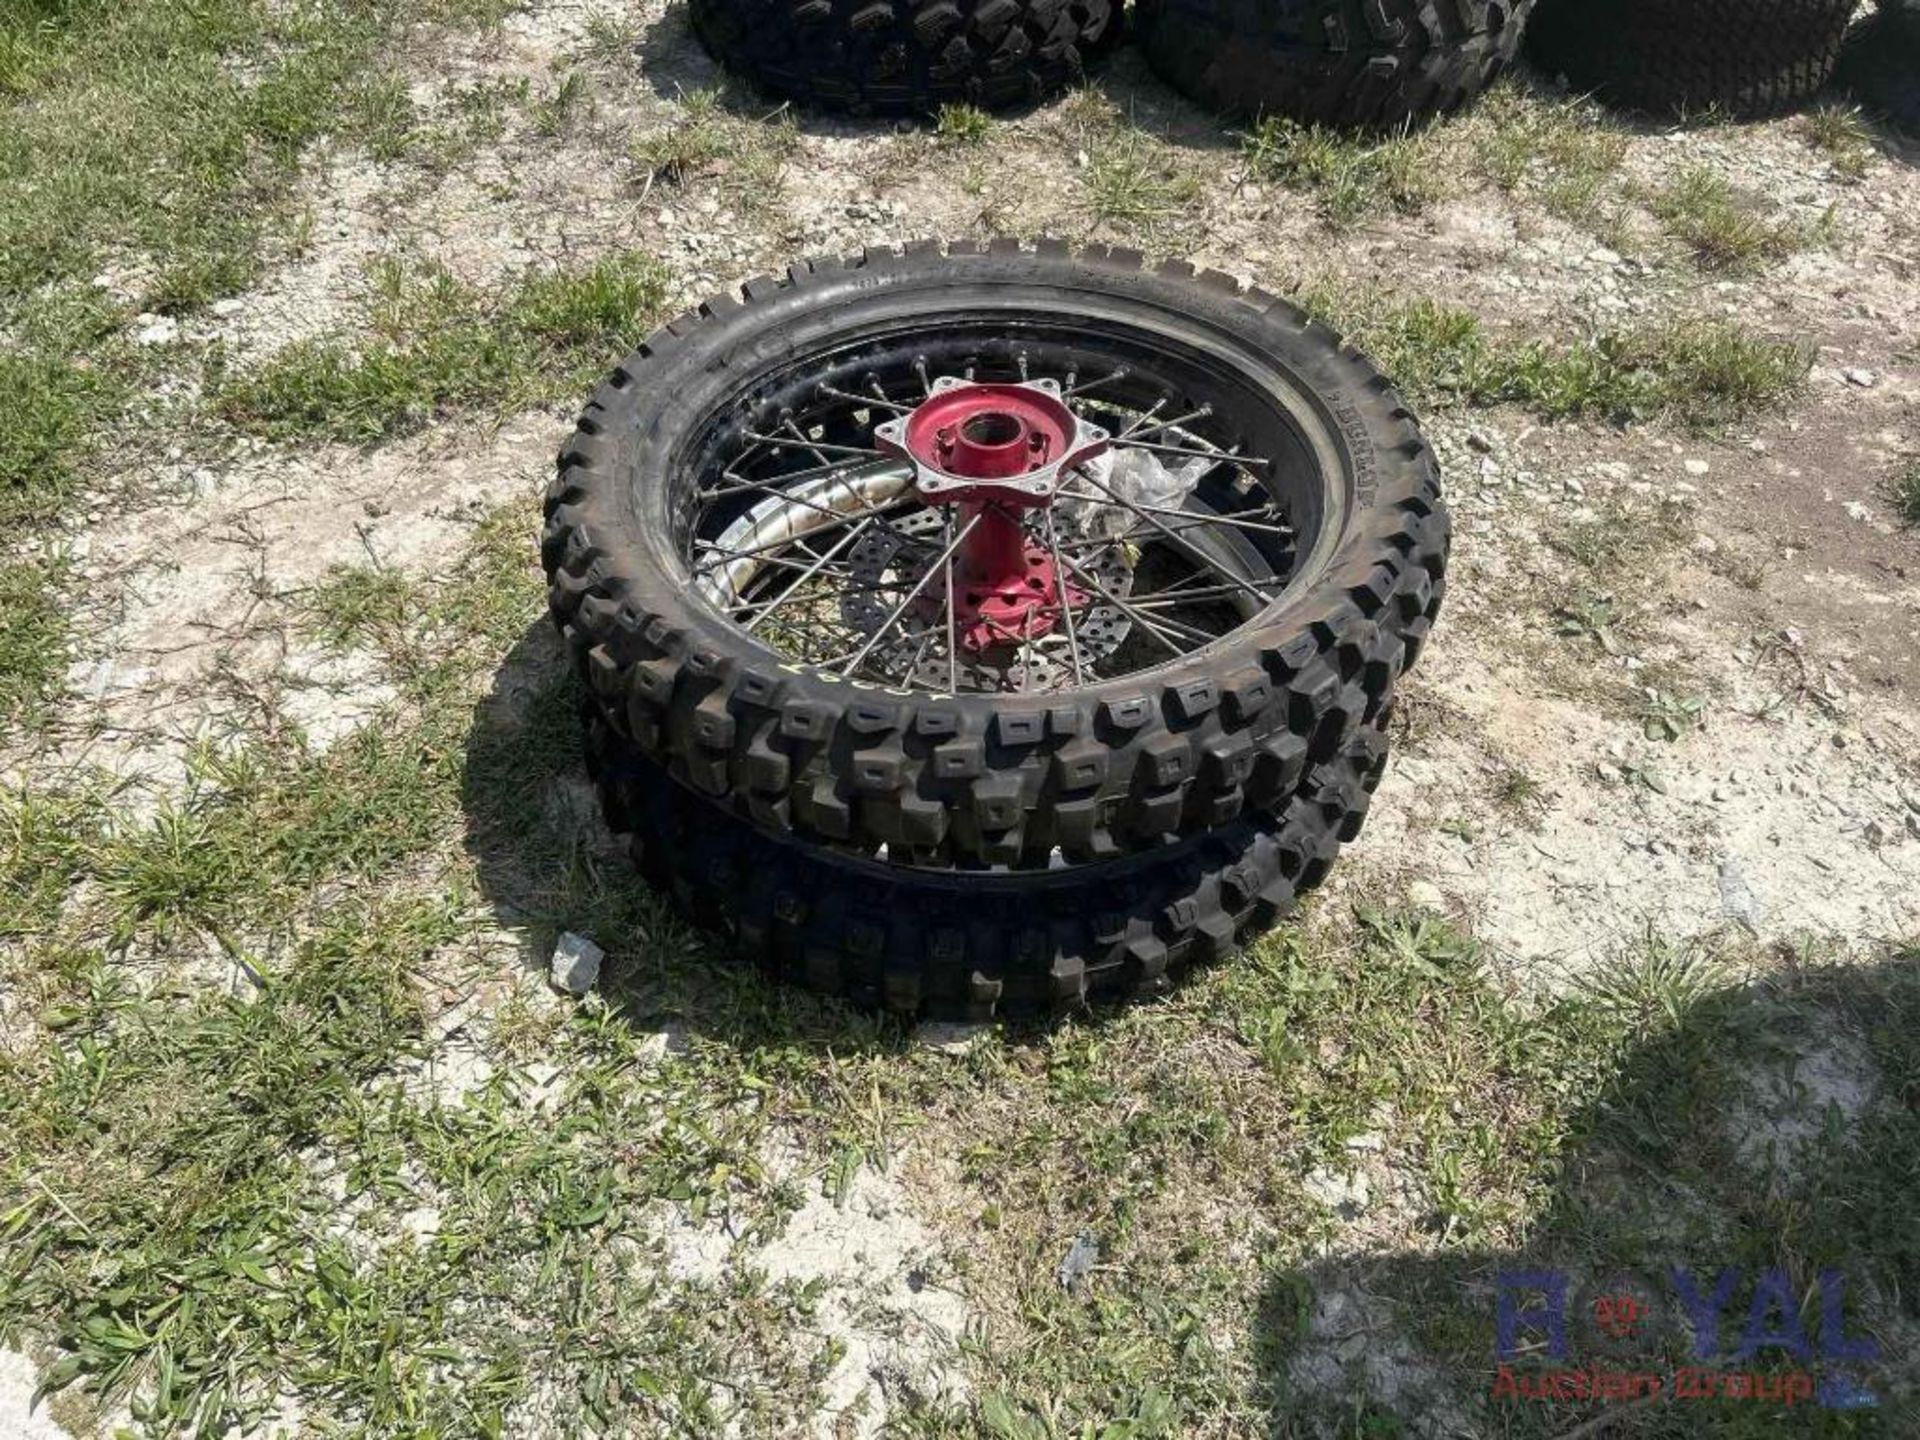 Lot of 2 Used Dirtbike Wheels and Tires - Image 5 of 5